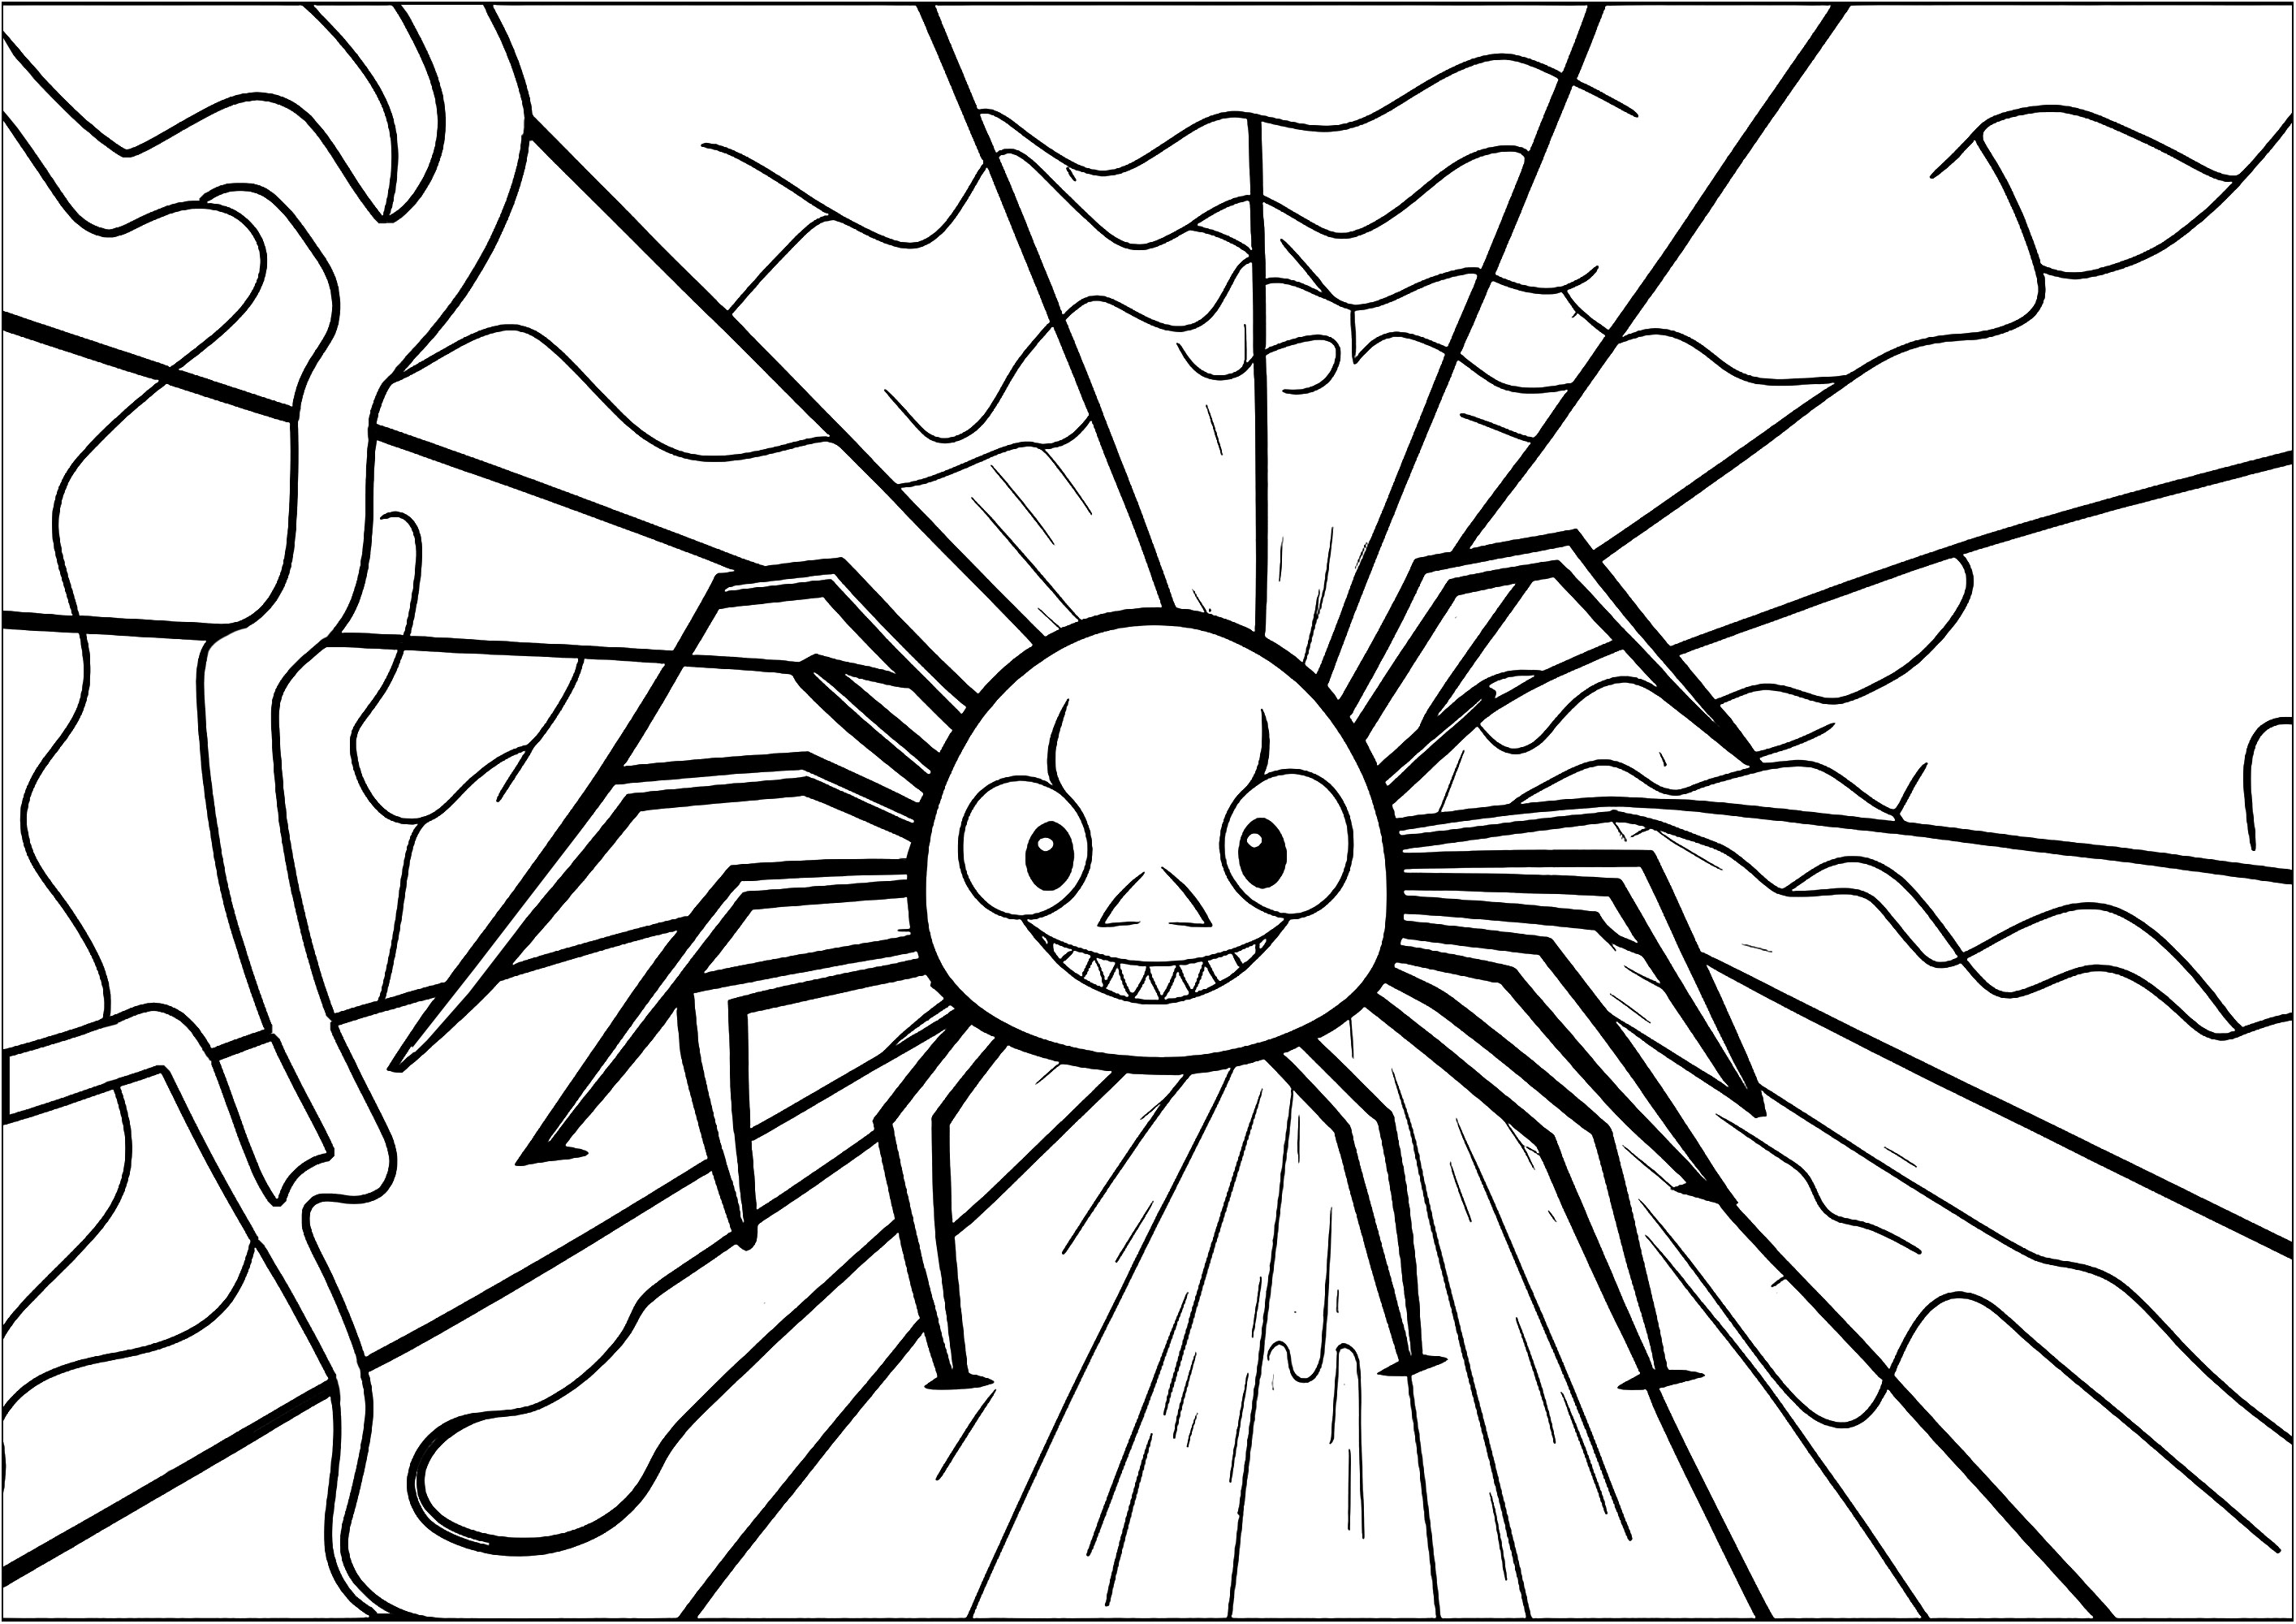 Funny little spider